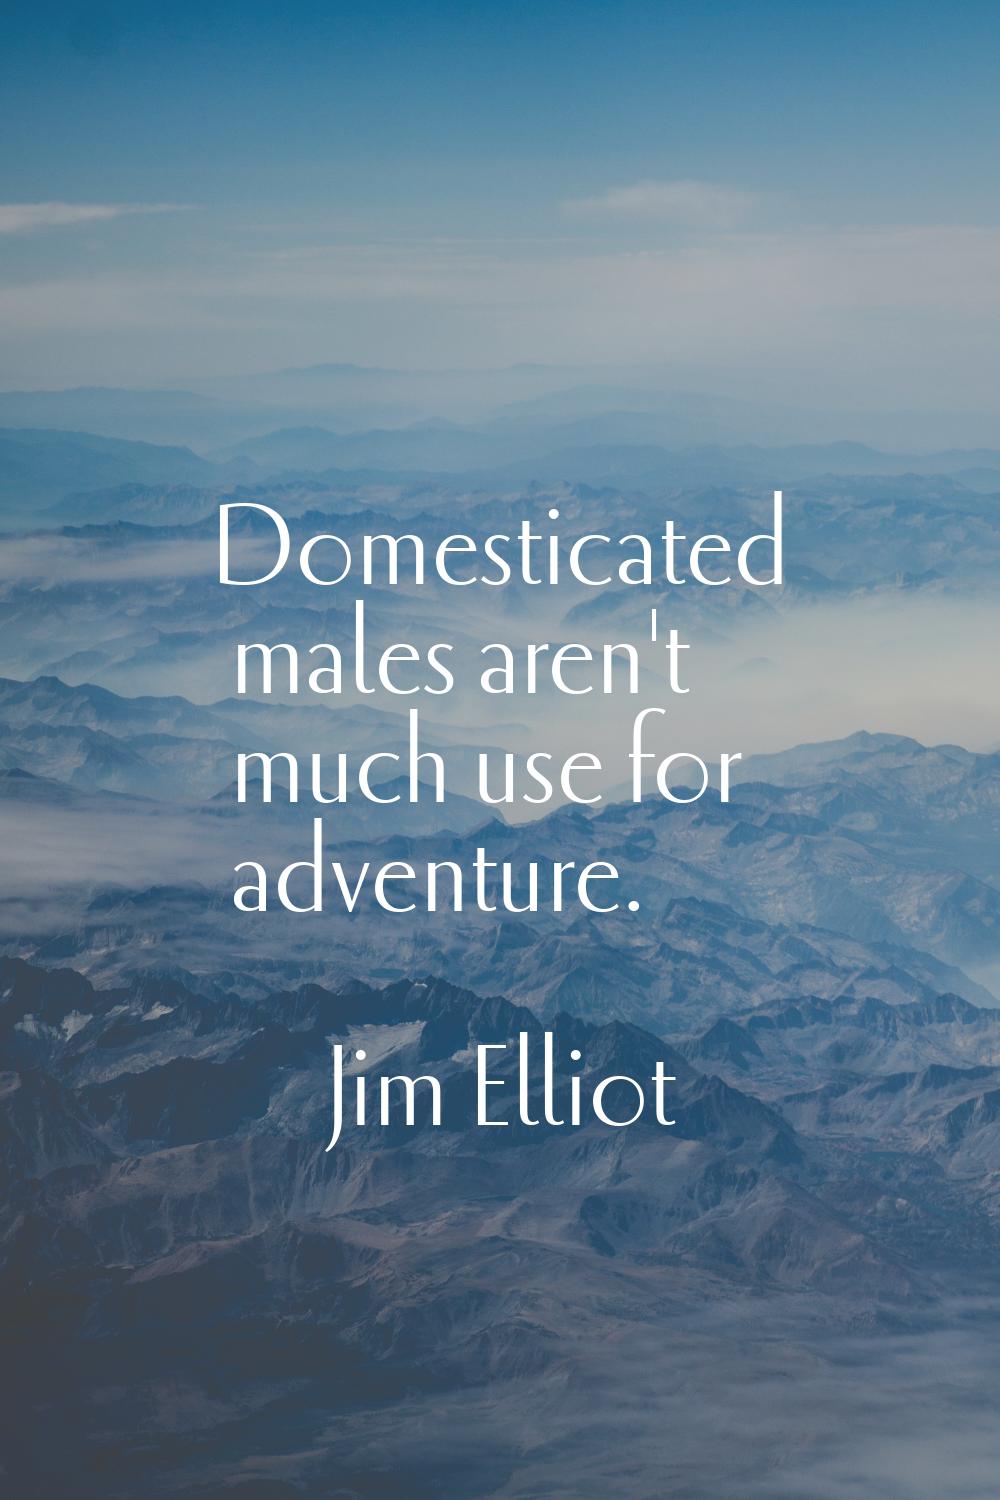 Domesticated males aren't much use for adventure.